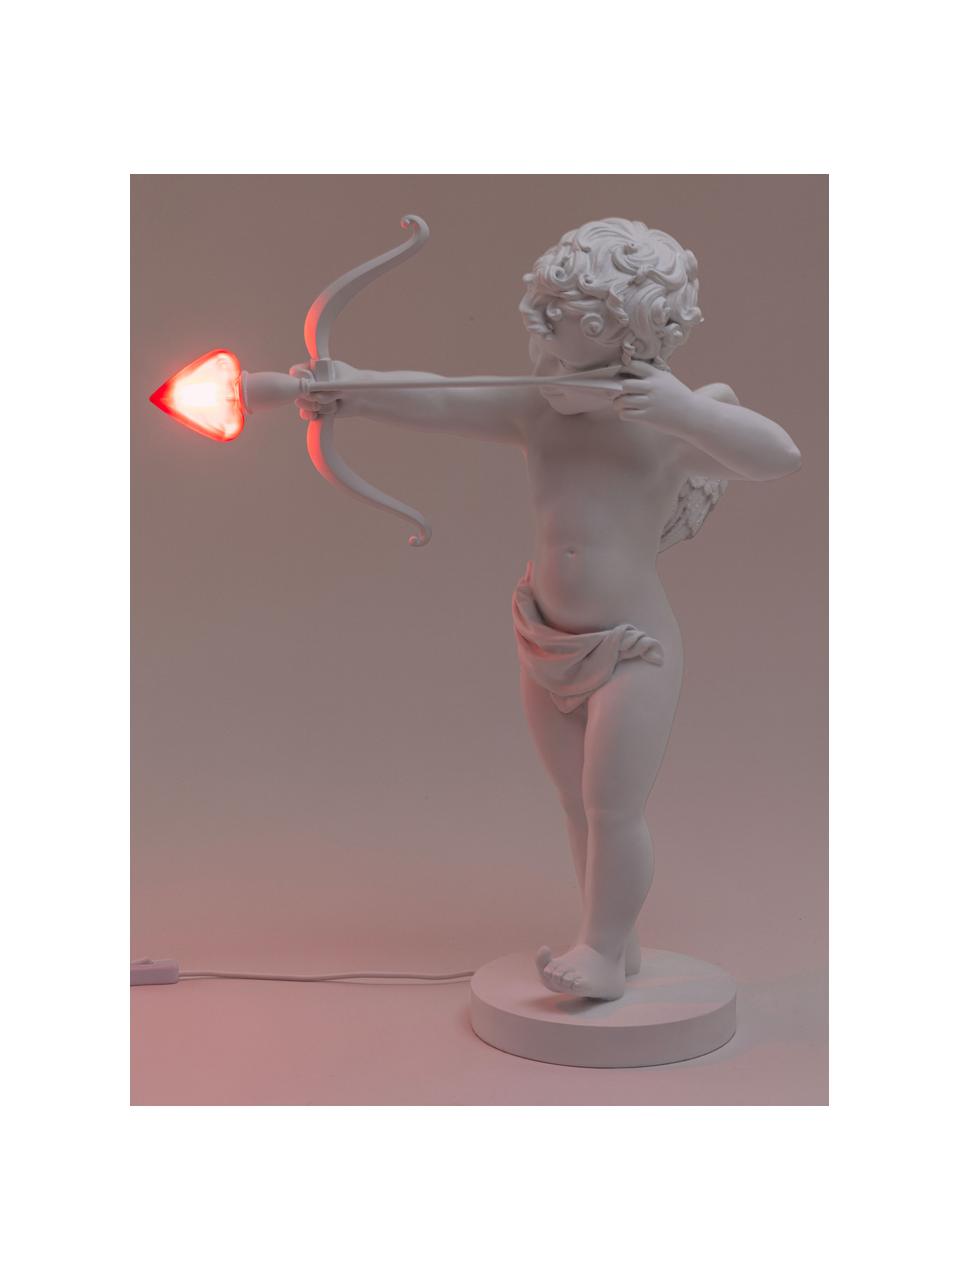 Grosse dimmbare Tischlampe Cupido, Kunststoff, Weiss, Rot, B 50 x H 63 cm